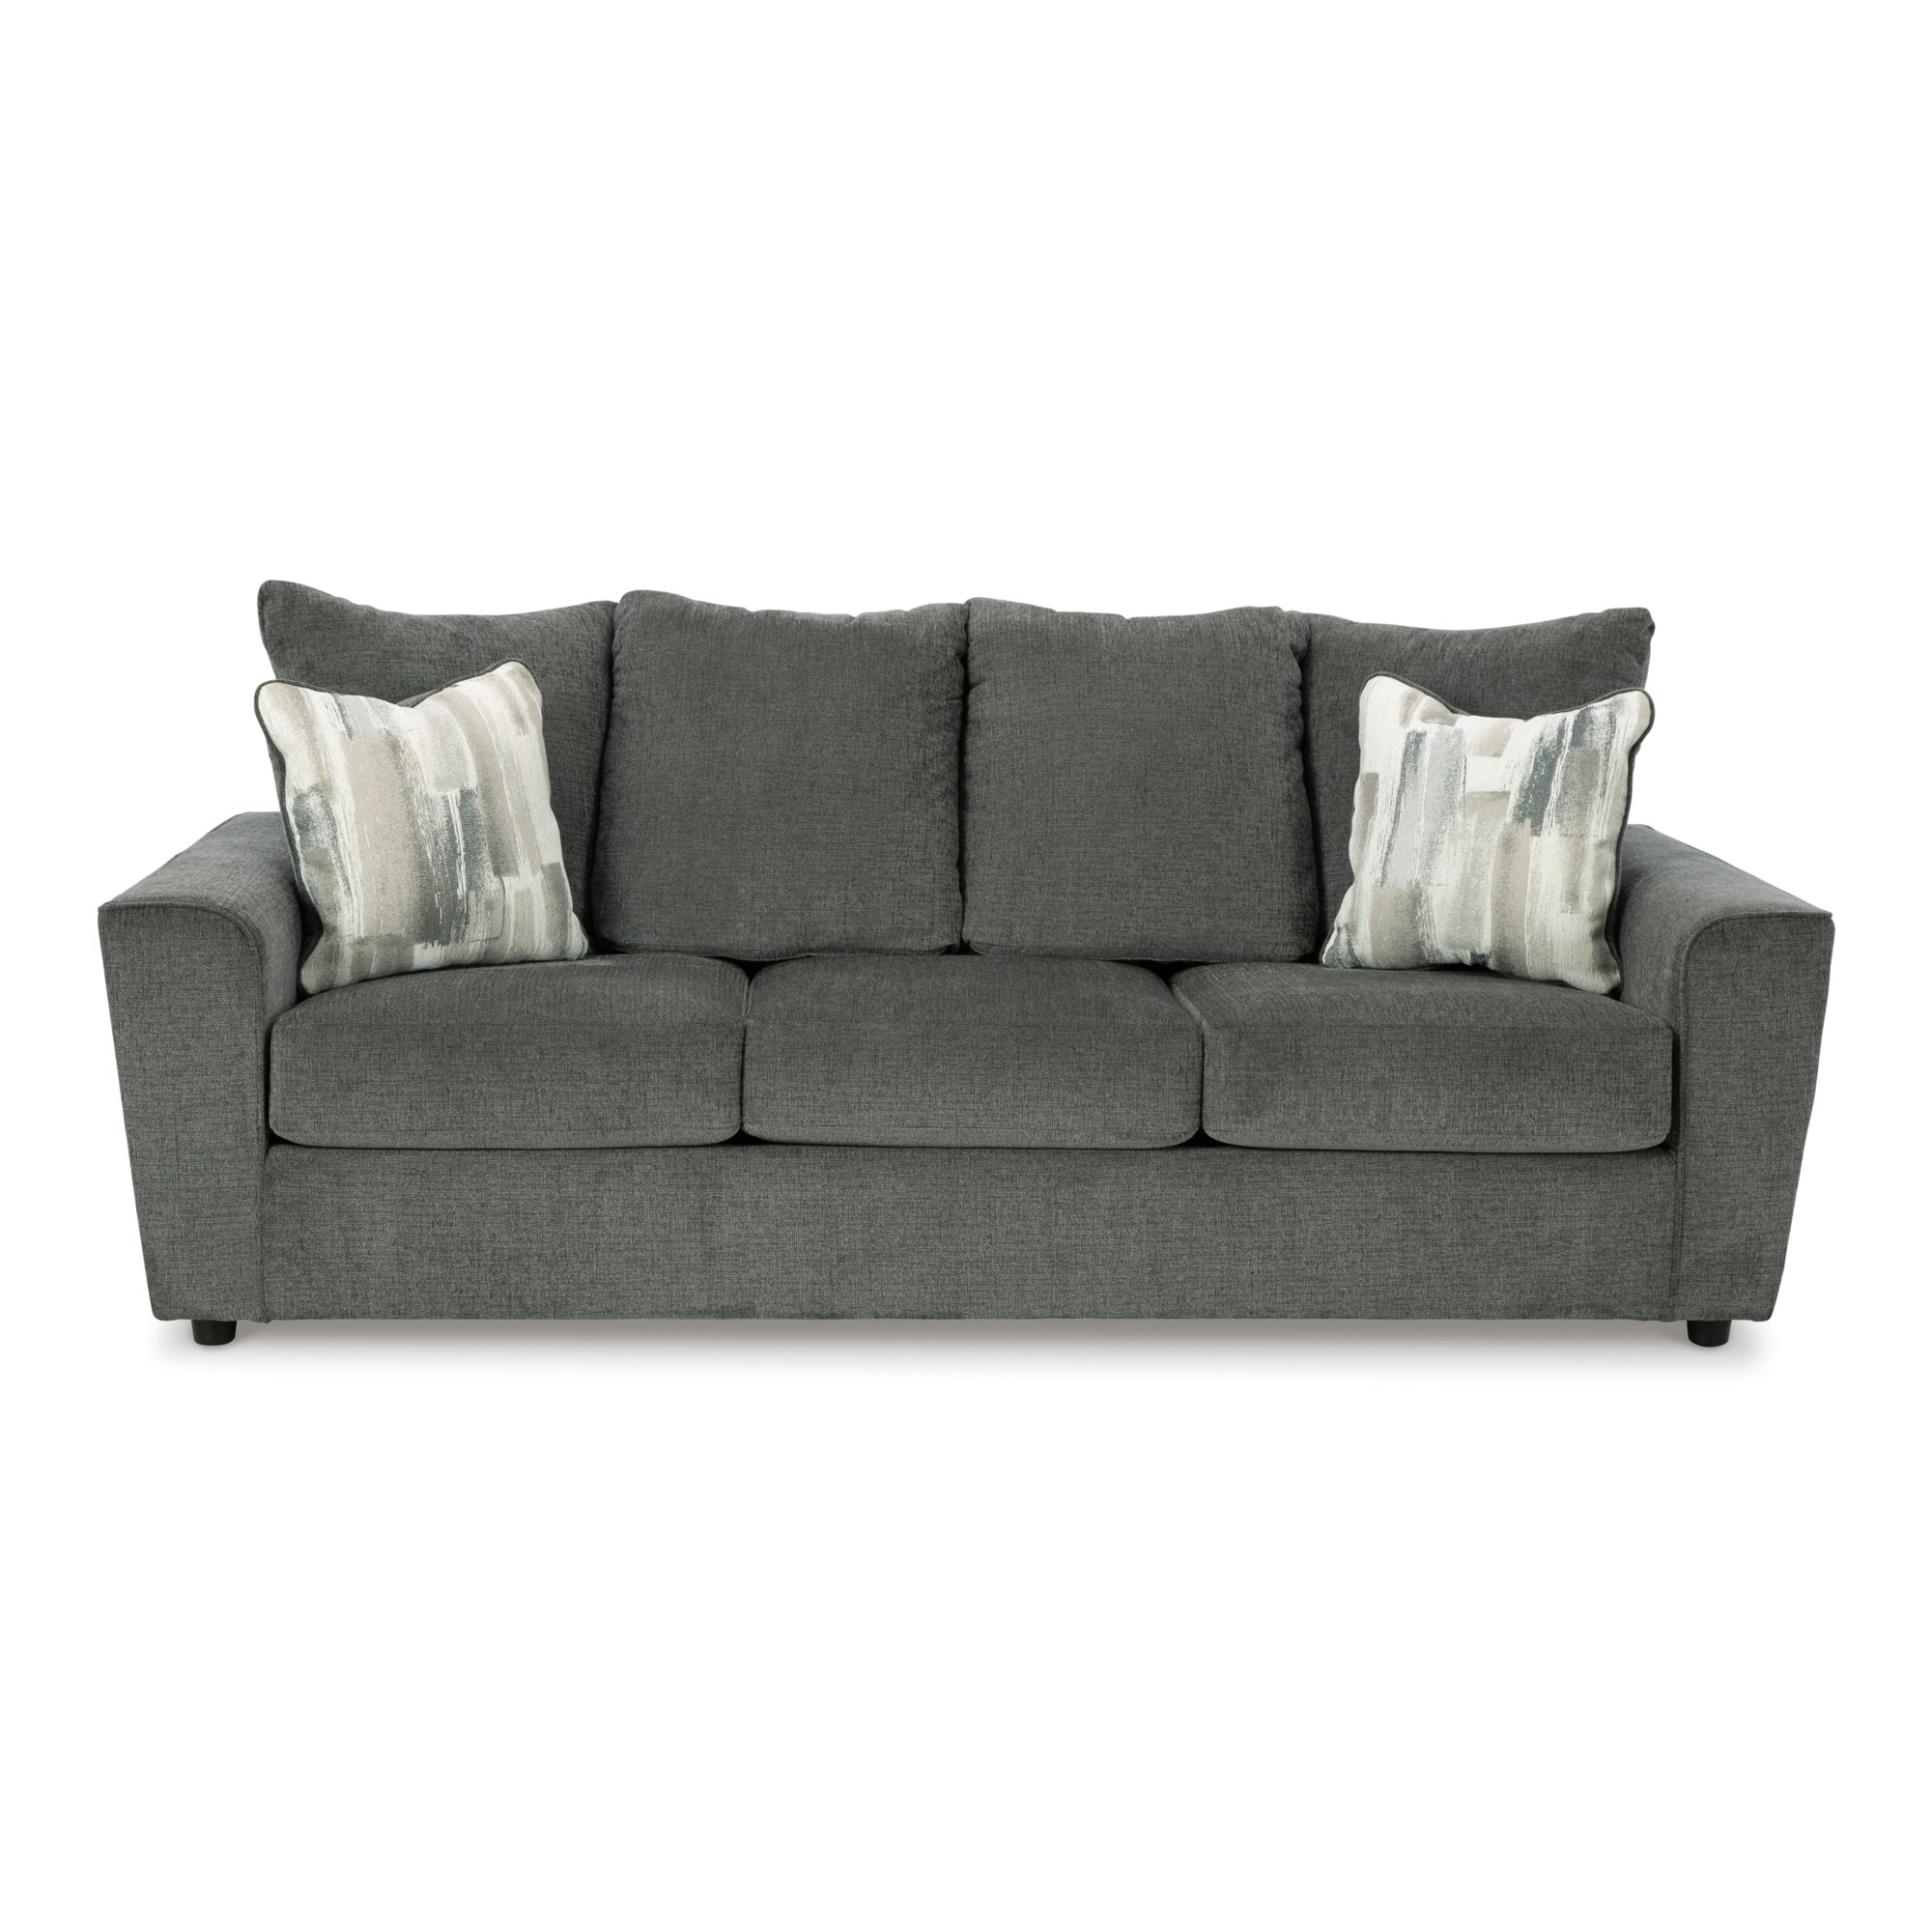 ashley furniture sofas and sectionals